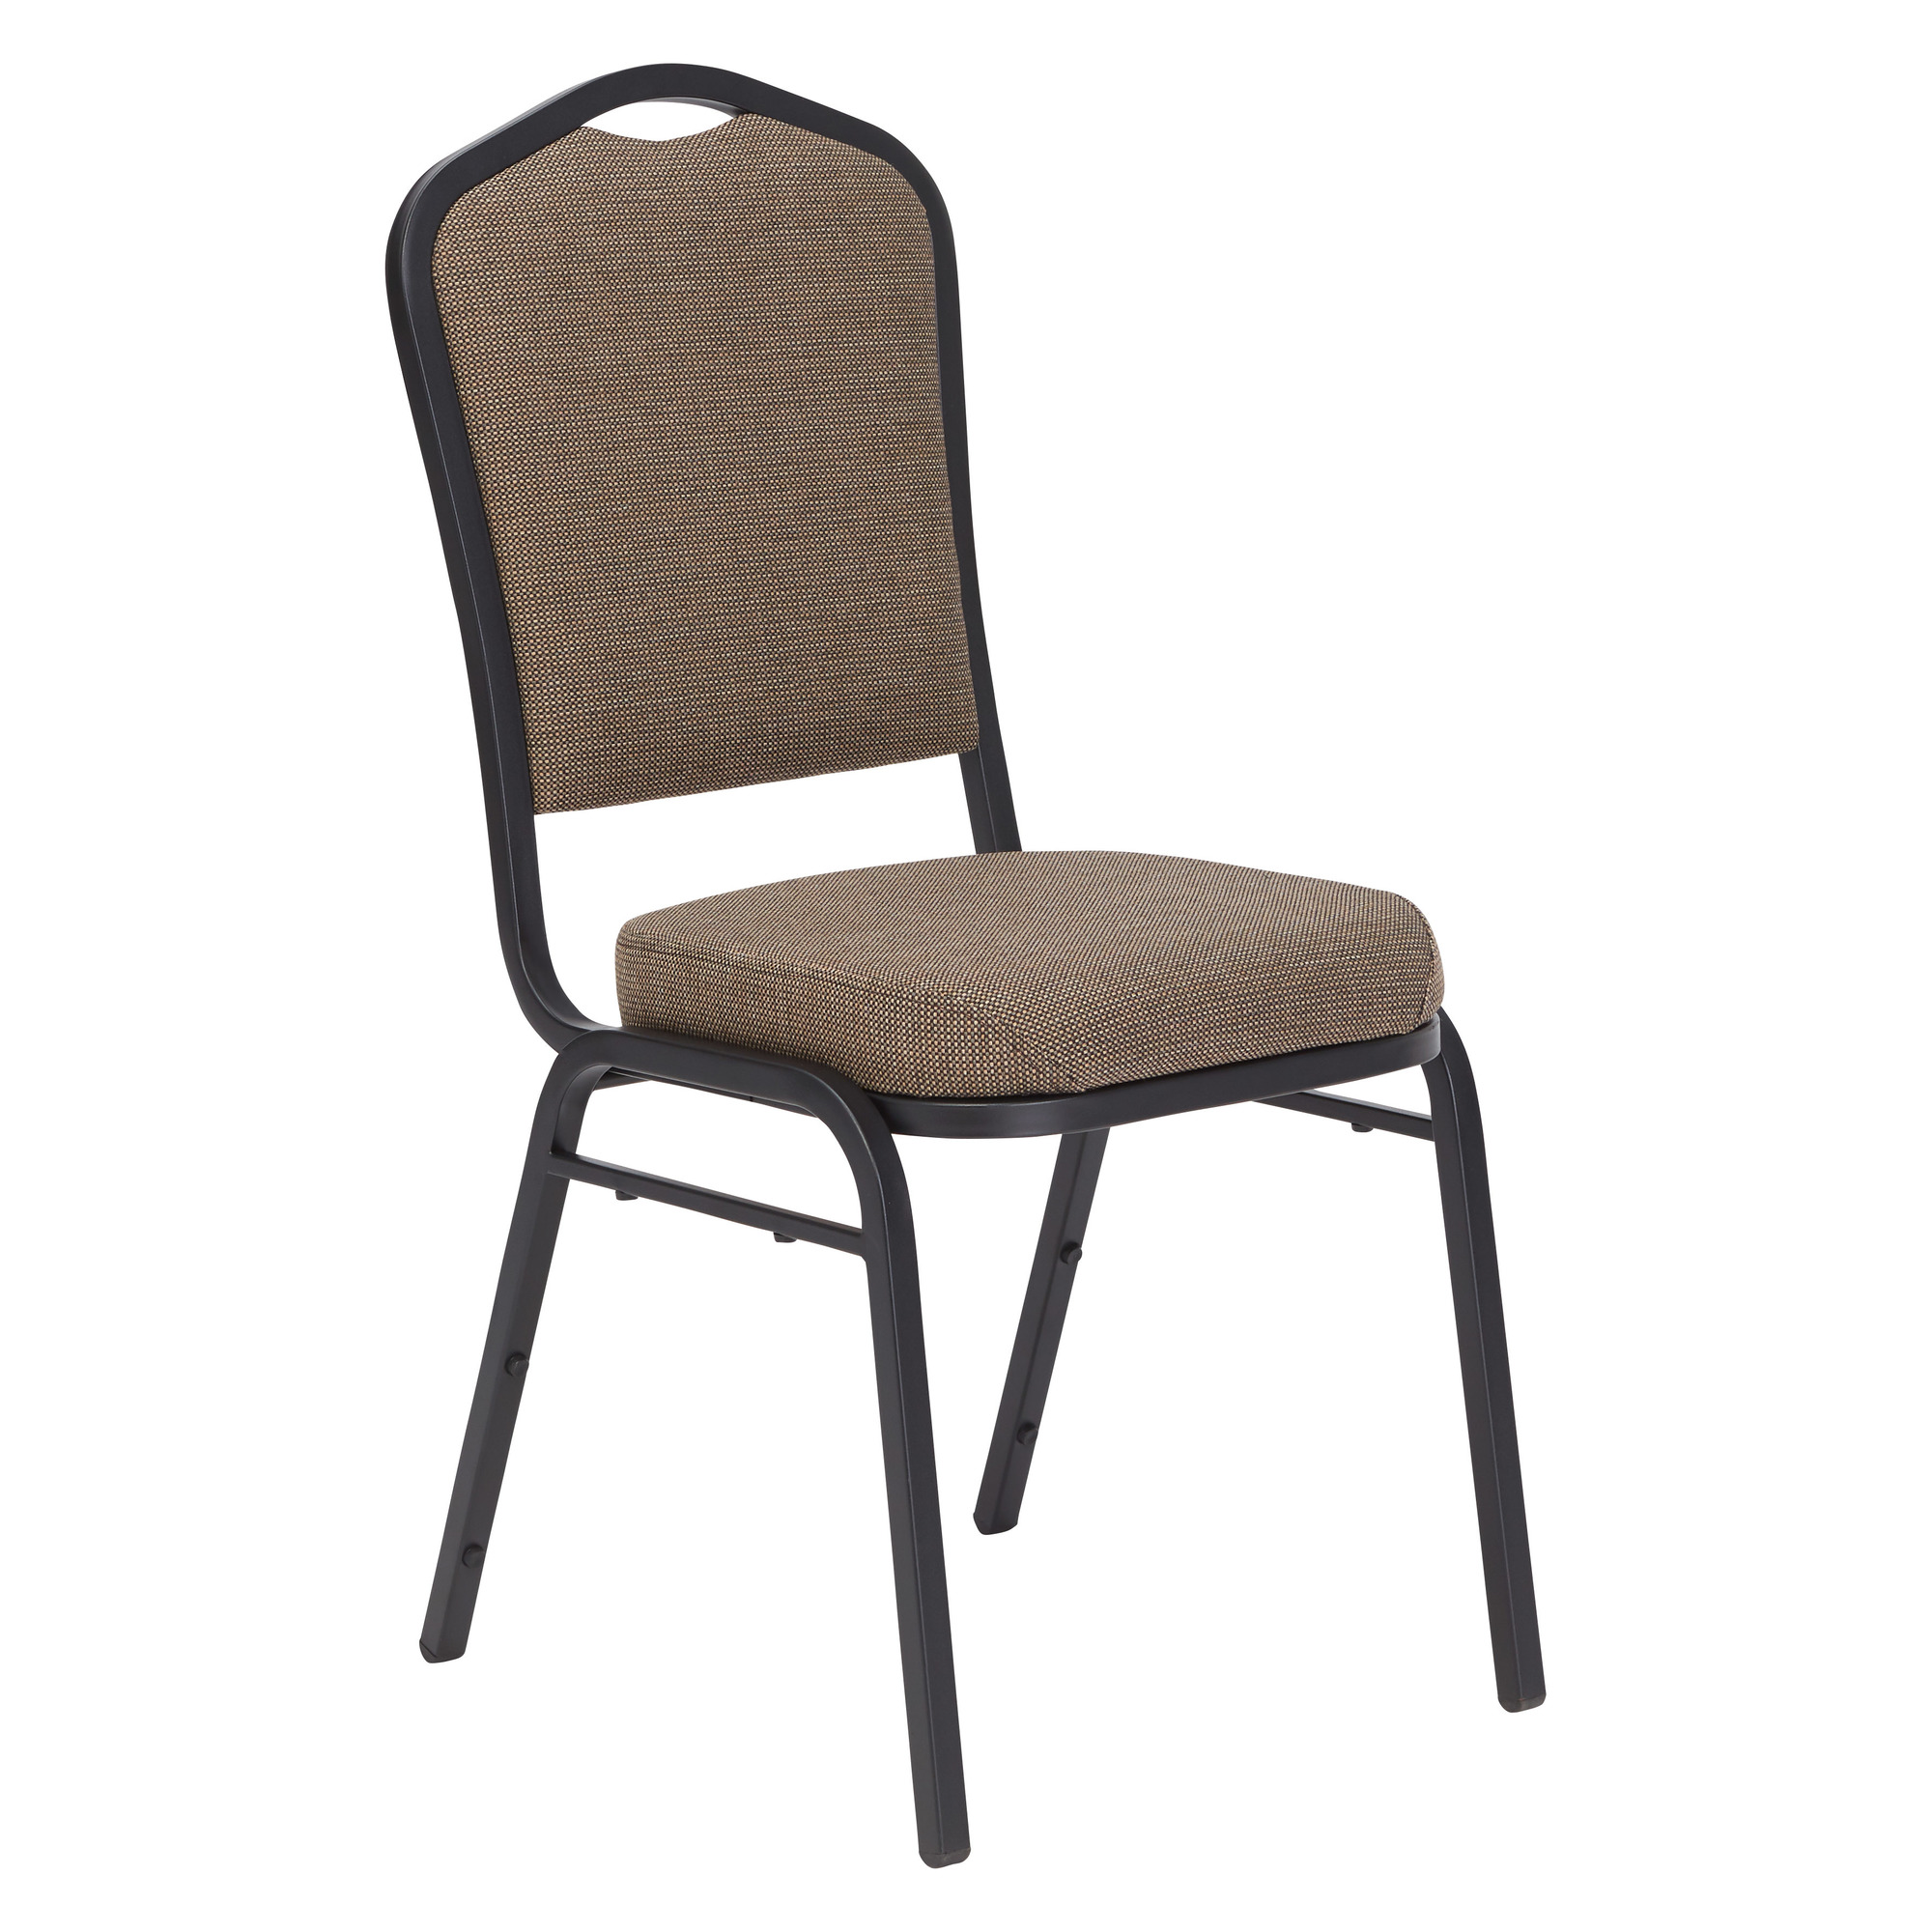 National Public Seating, 9300 Series Fabric Stack Chair, Primary Color Taupe, Included (qty.) 1, Seating Type Dining Chair, Model 9378-BT